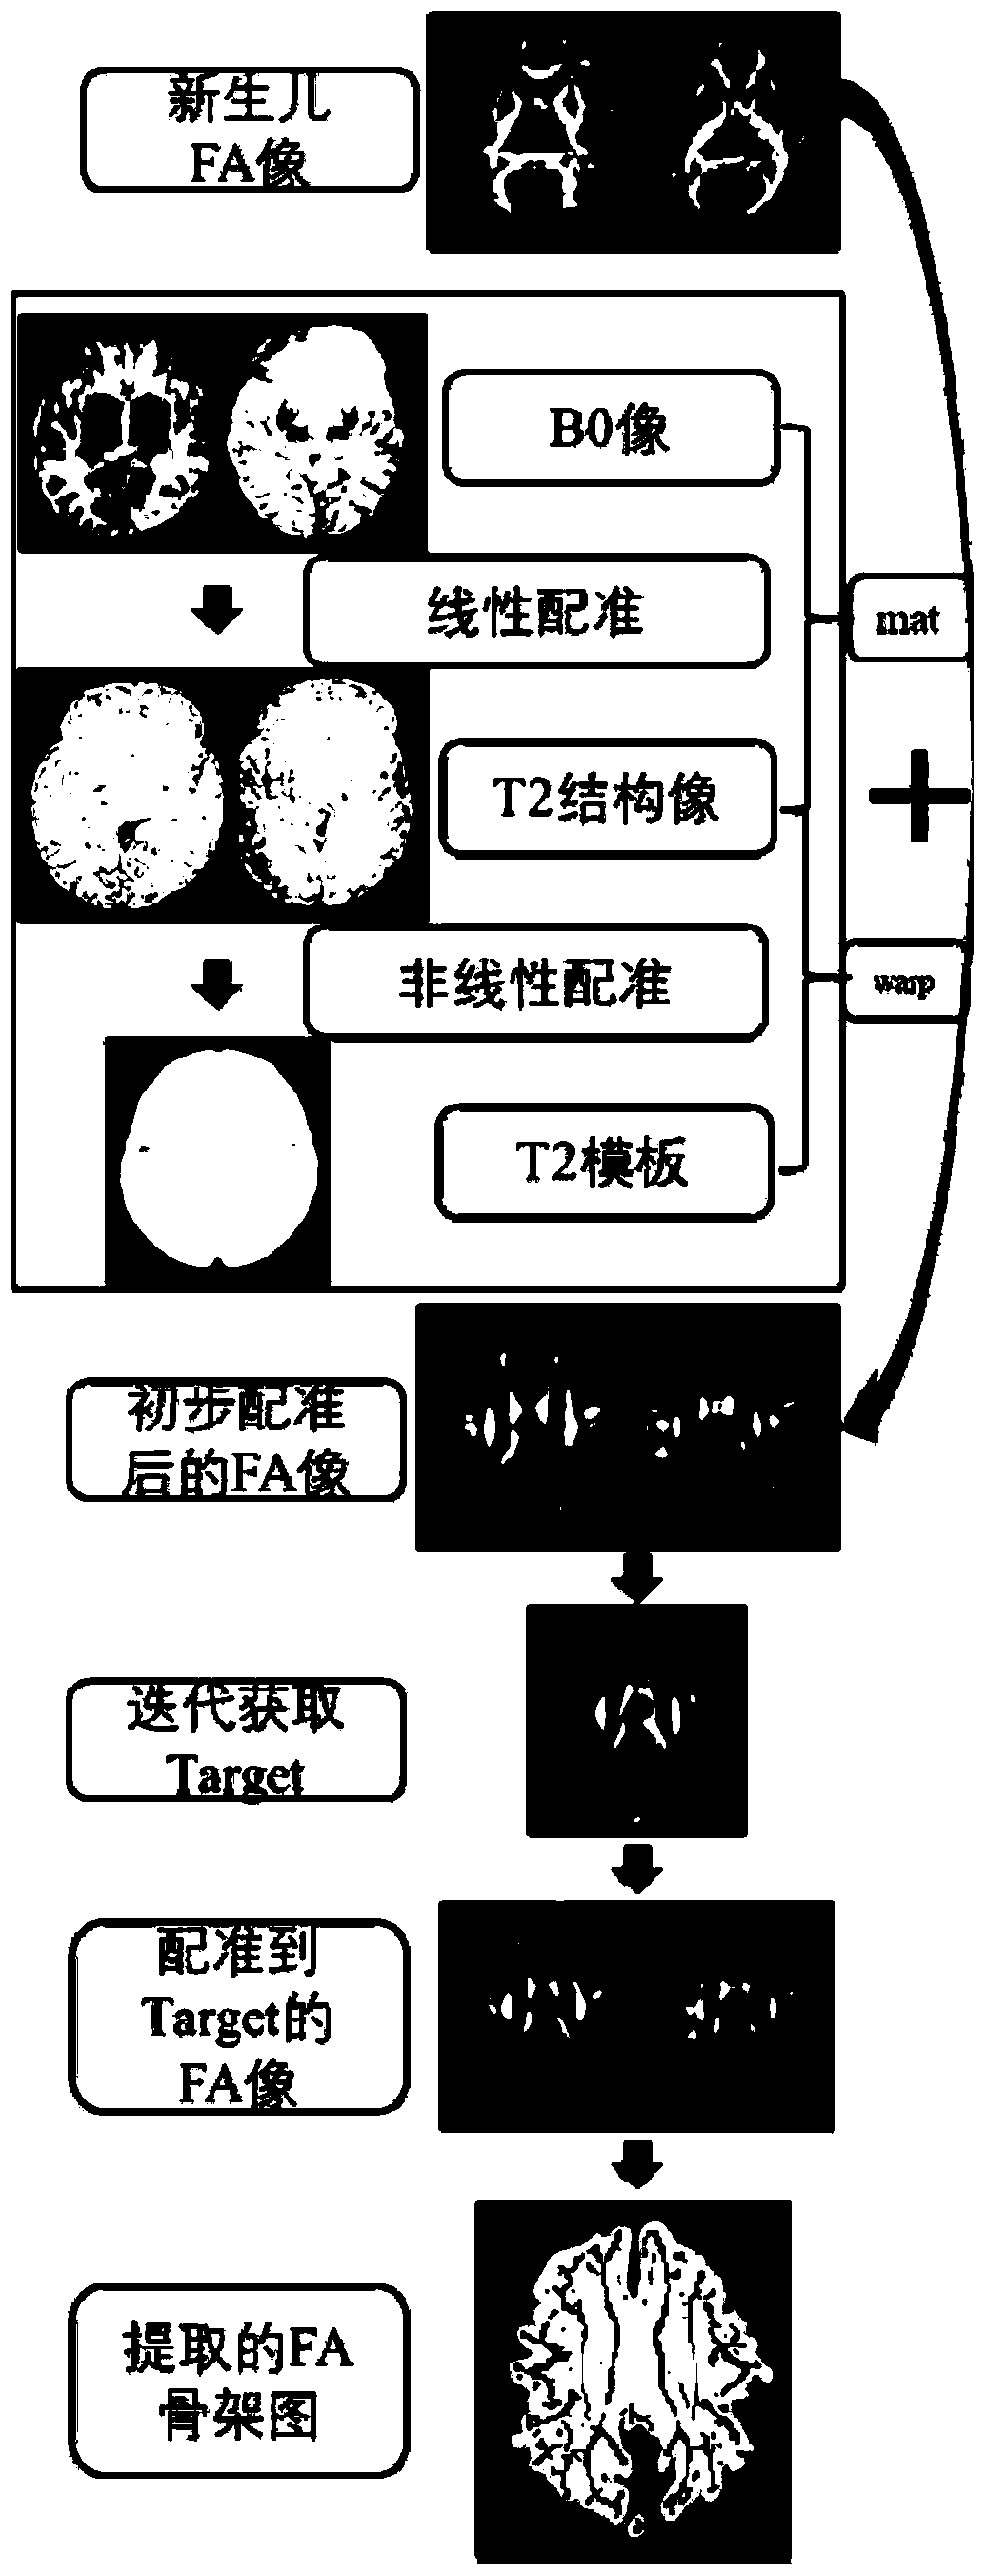 Magnetic resonance diffusion tensor brain image analysis method and system for newborns